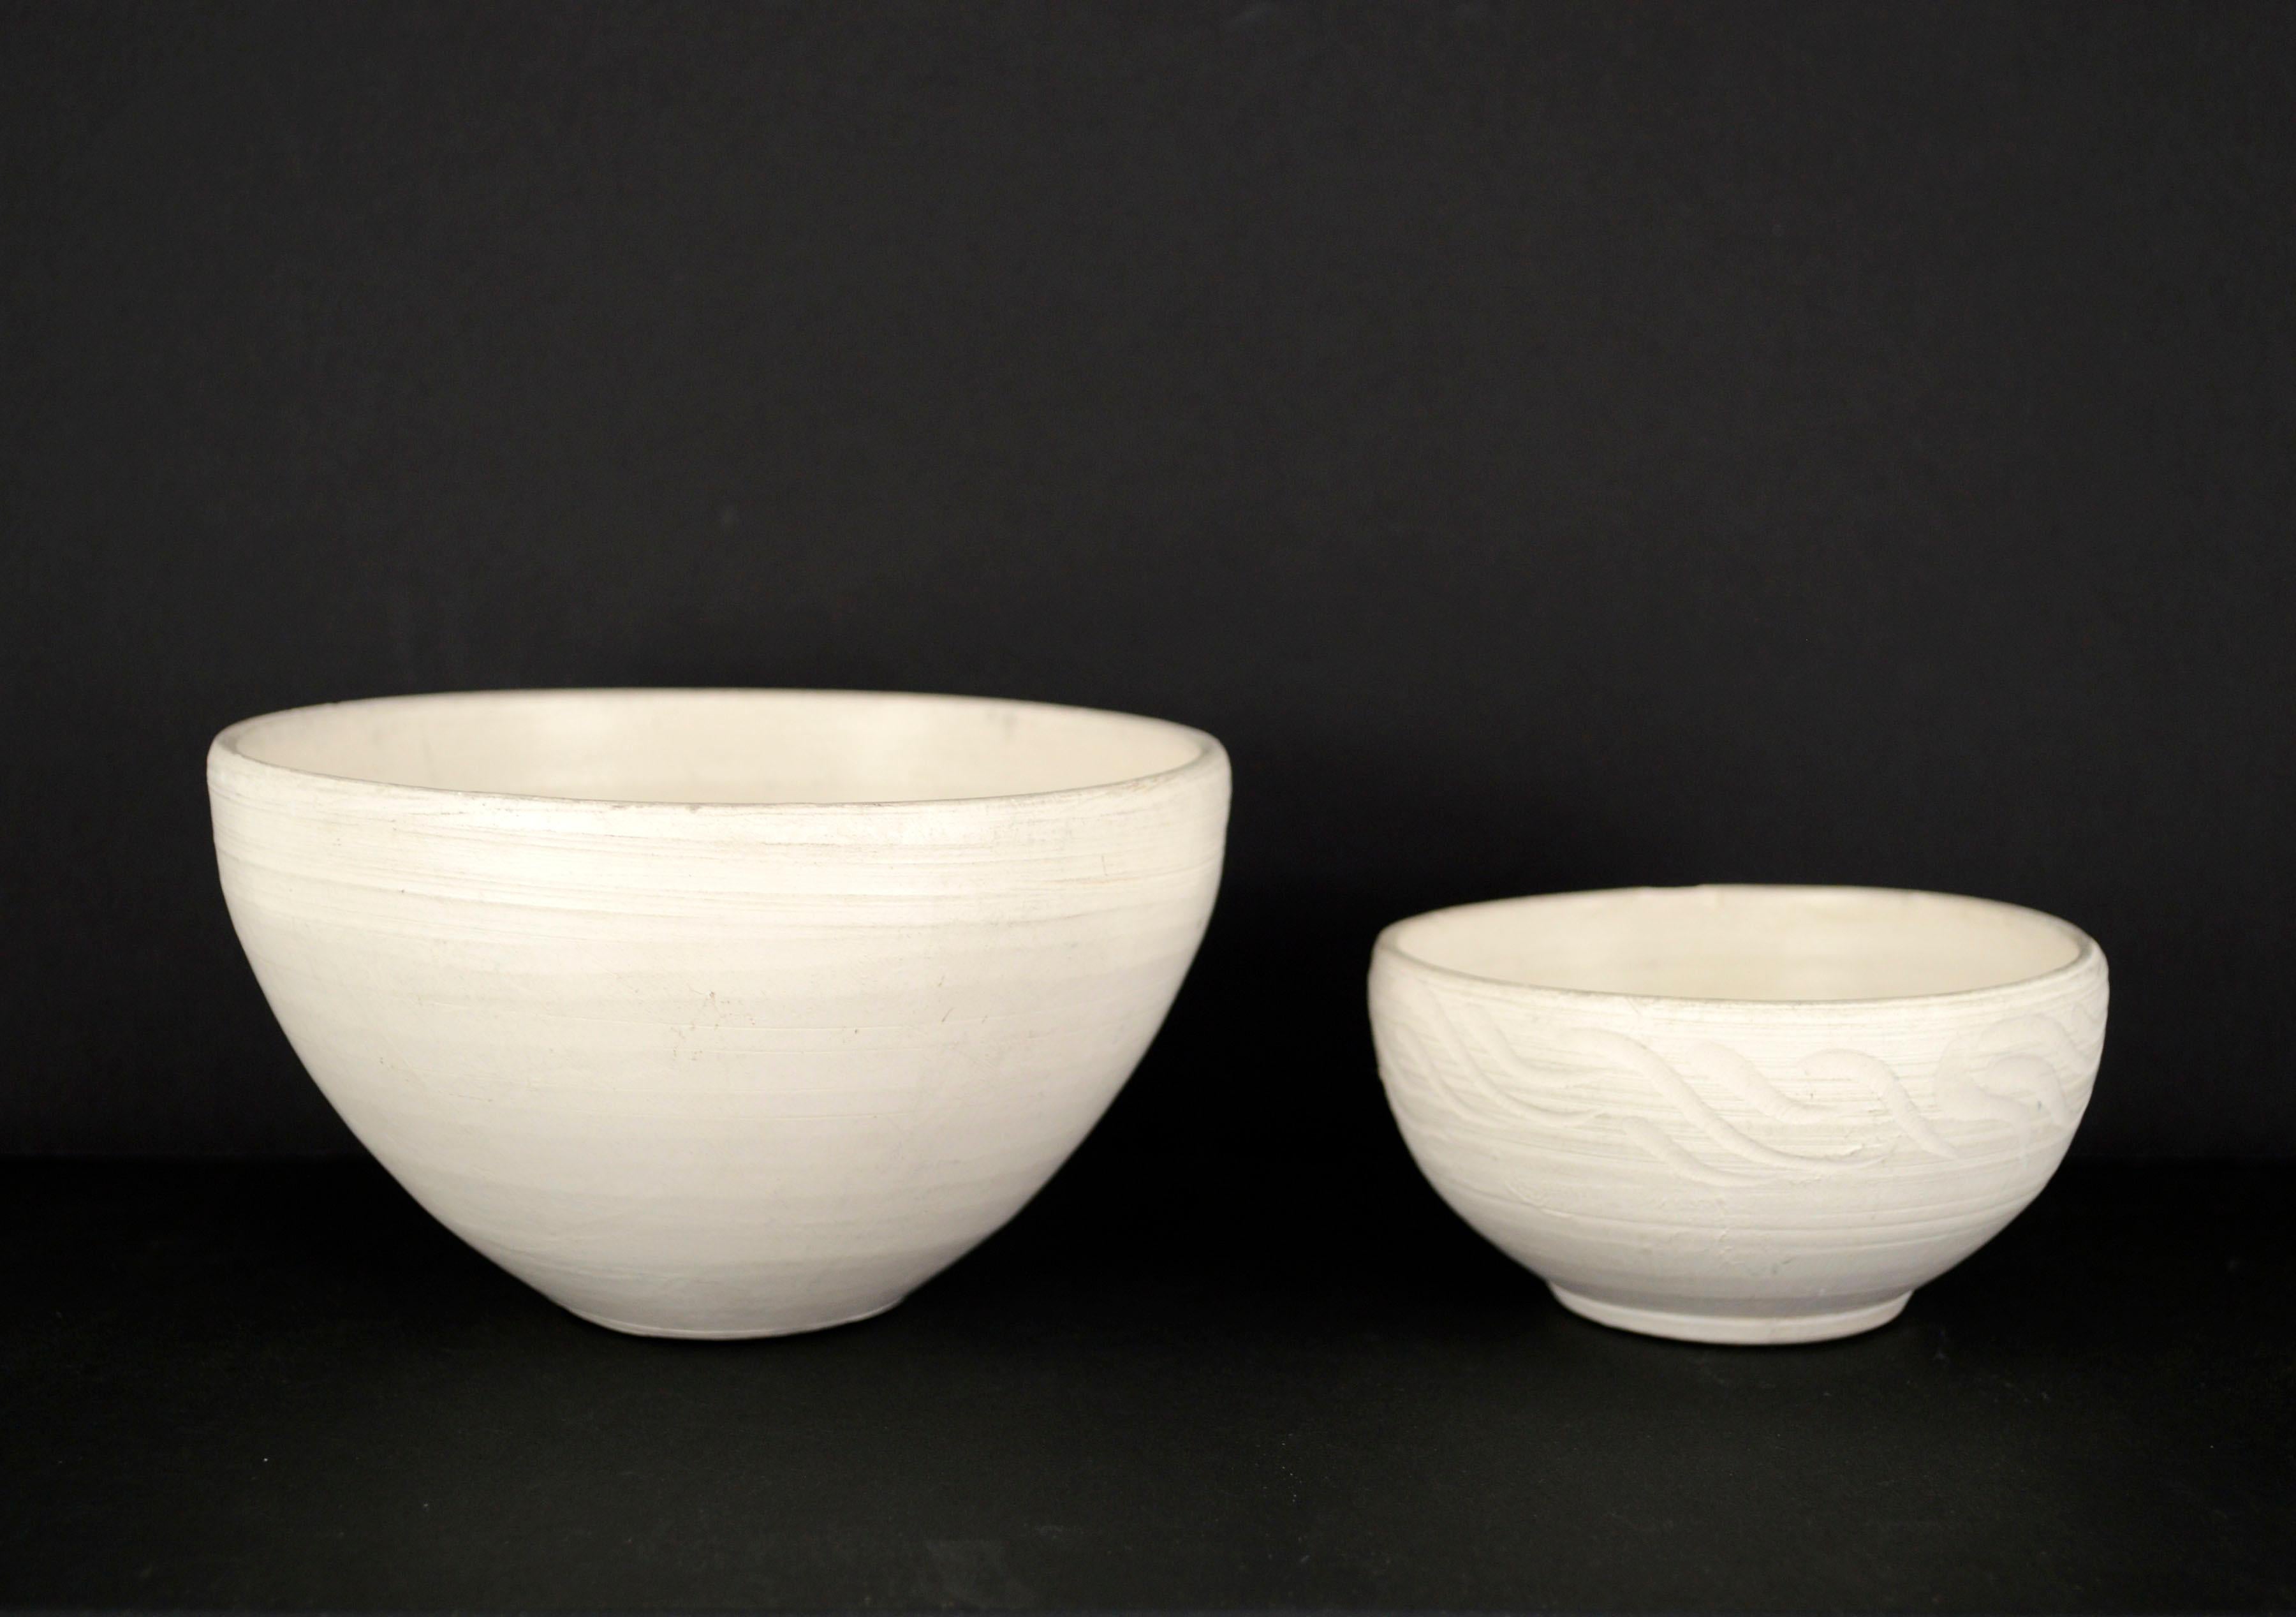 Set of two hand thrown mid-century pottery bowls by California artist Hamilton Achille Wolf (American, 1883 - 1967), 
these two bowls exemplify an organic modern aesthetic with a white matte finish, natural texture, and minimalist design. The